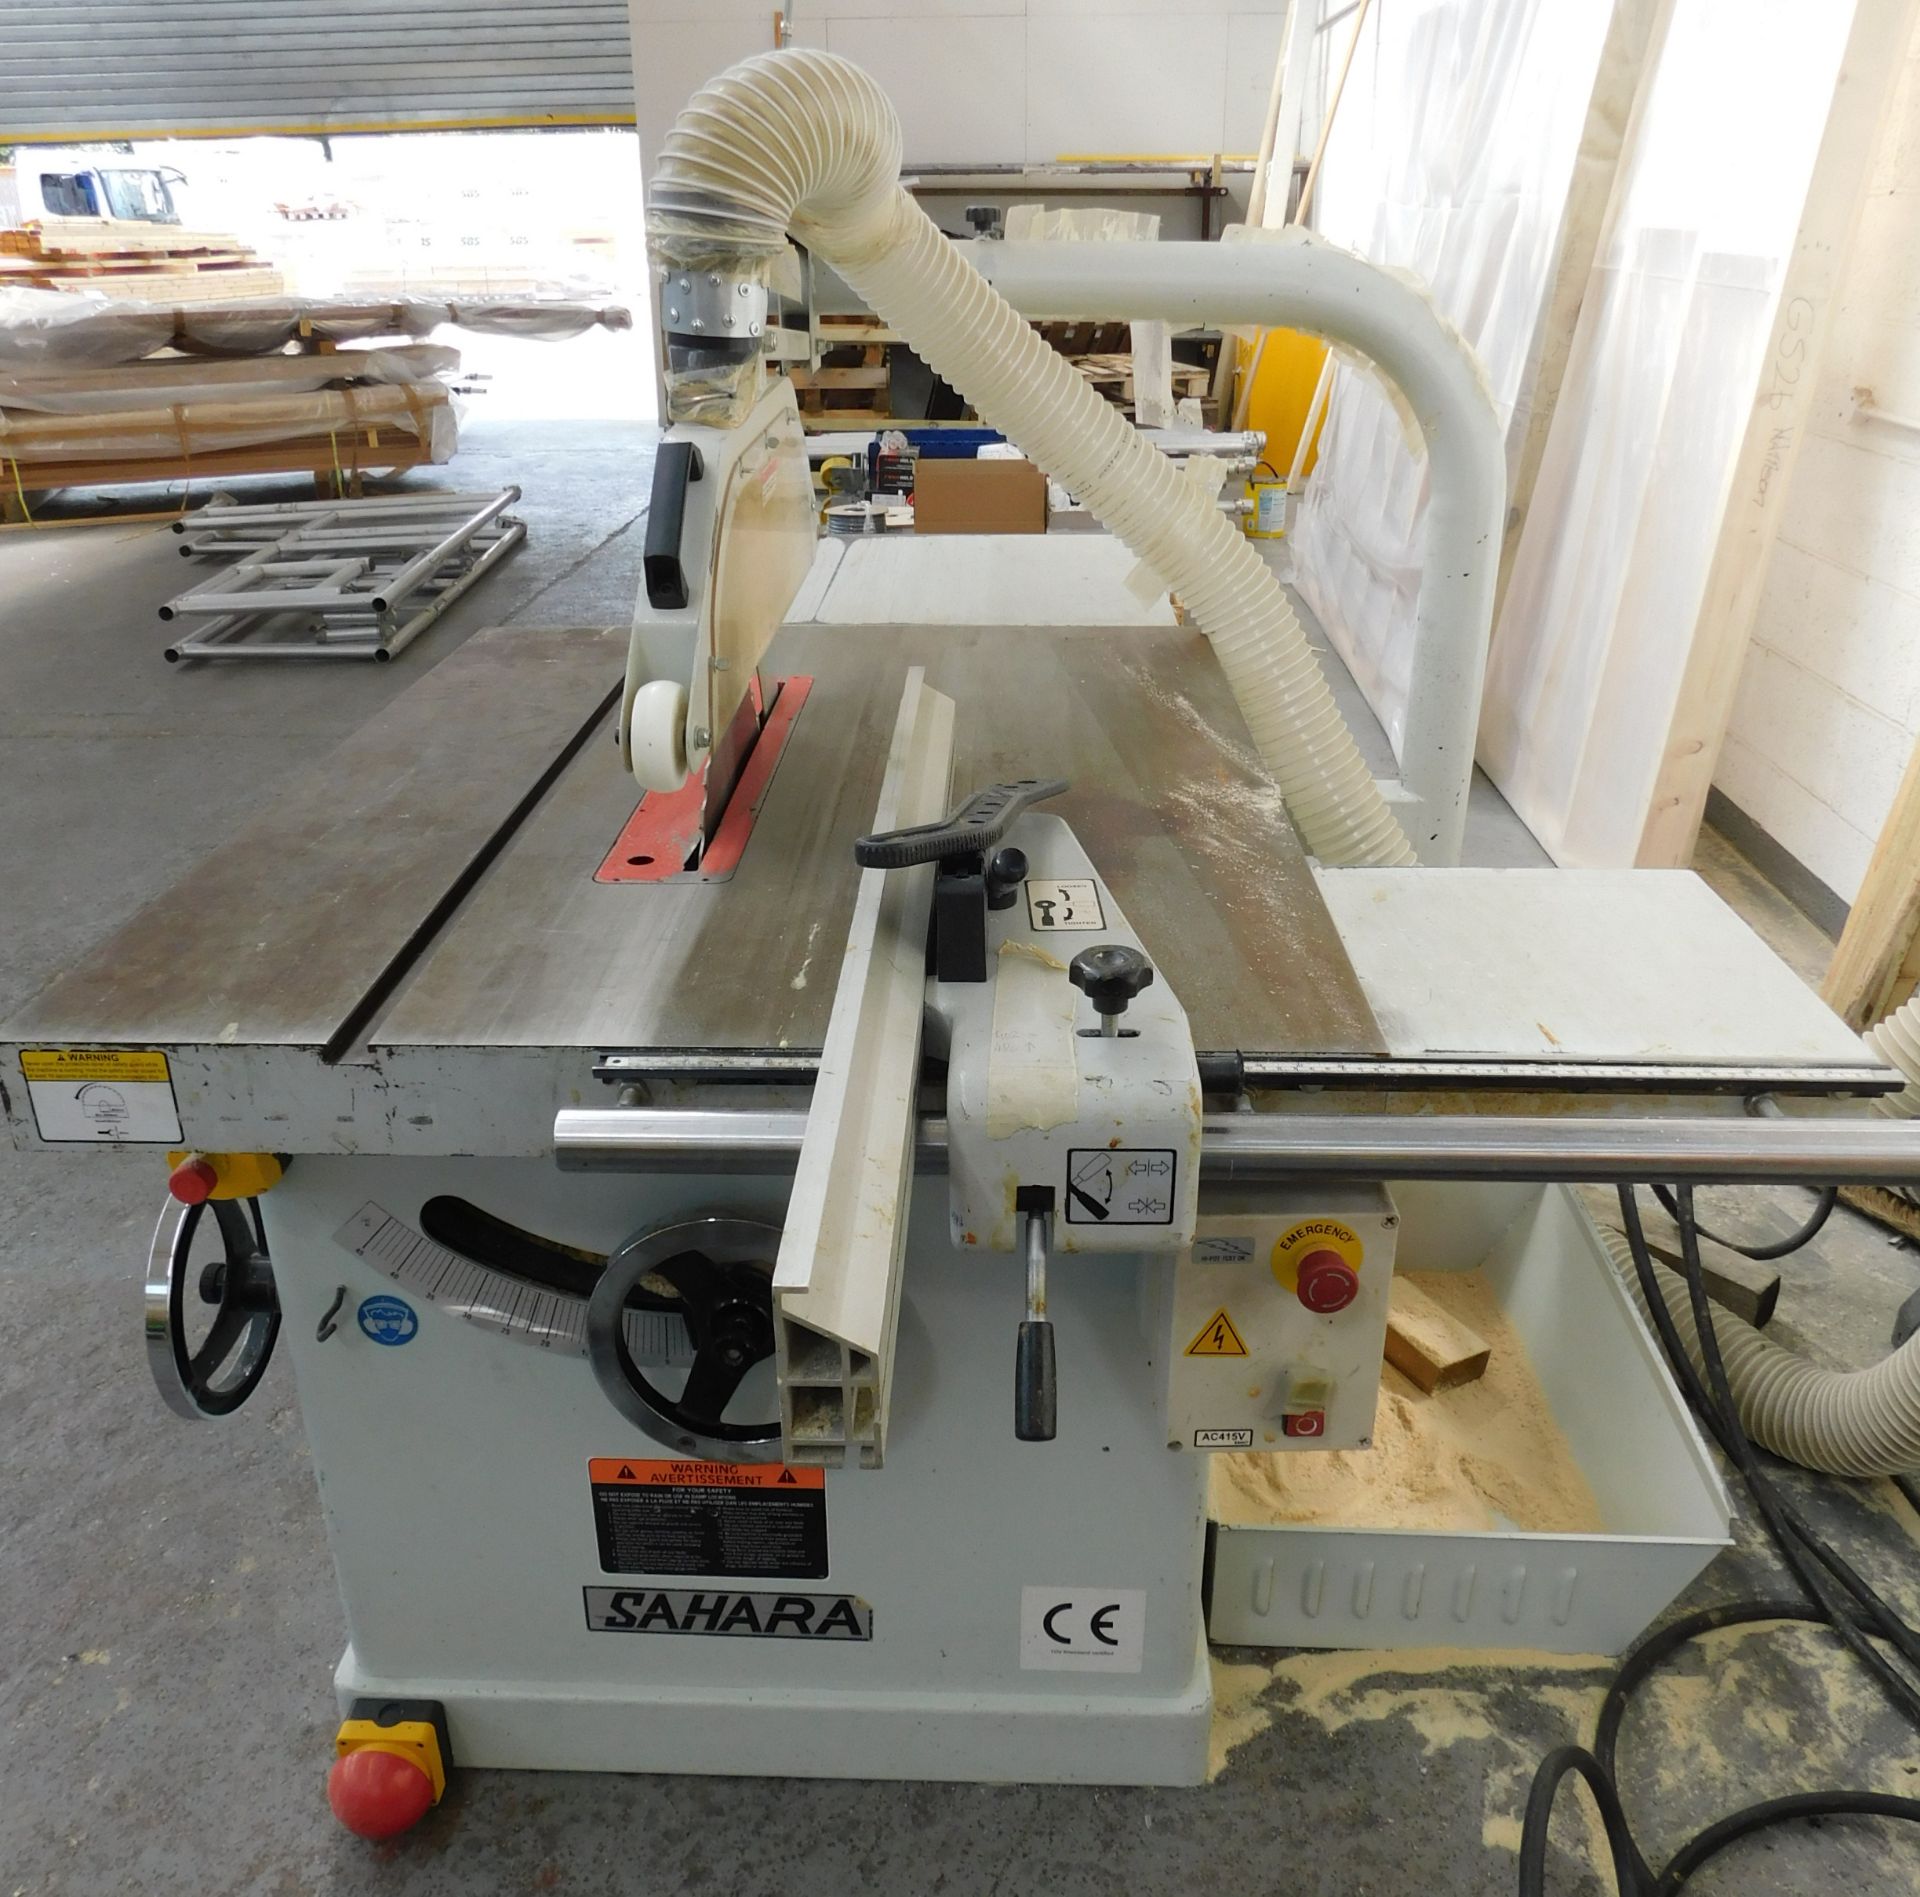 Sahara Model TSCE-4SOR Circular Saw Bench, Serial Number: 12010004, 3 Phase (Located: Barton-le- - Image 5 of 5